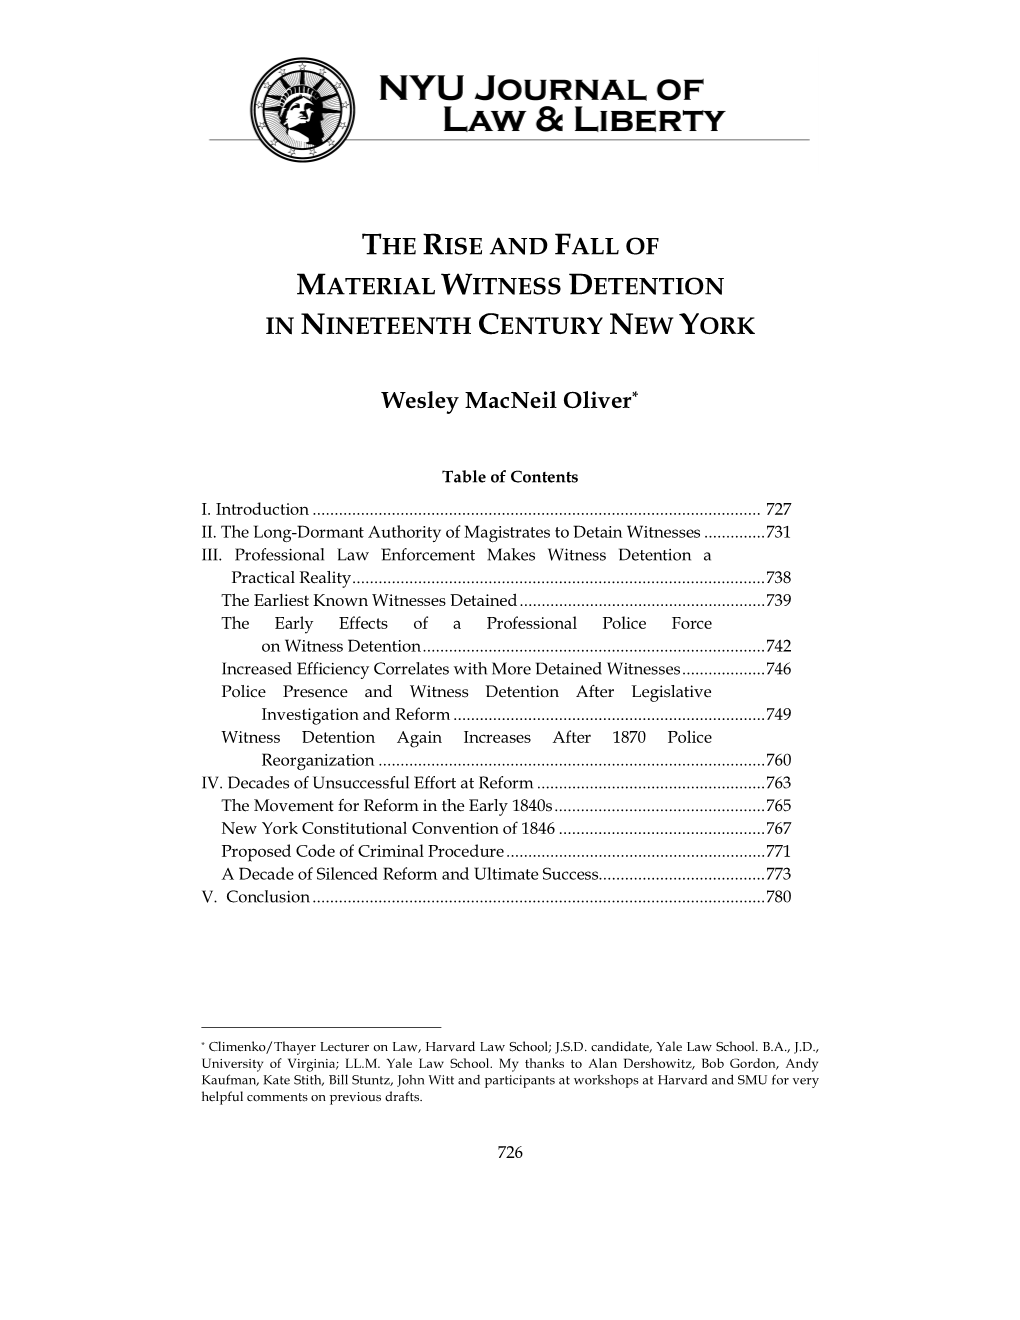 The Rise and Fall of Material Witness Detention in Nineteenth Century New York